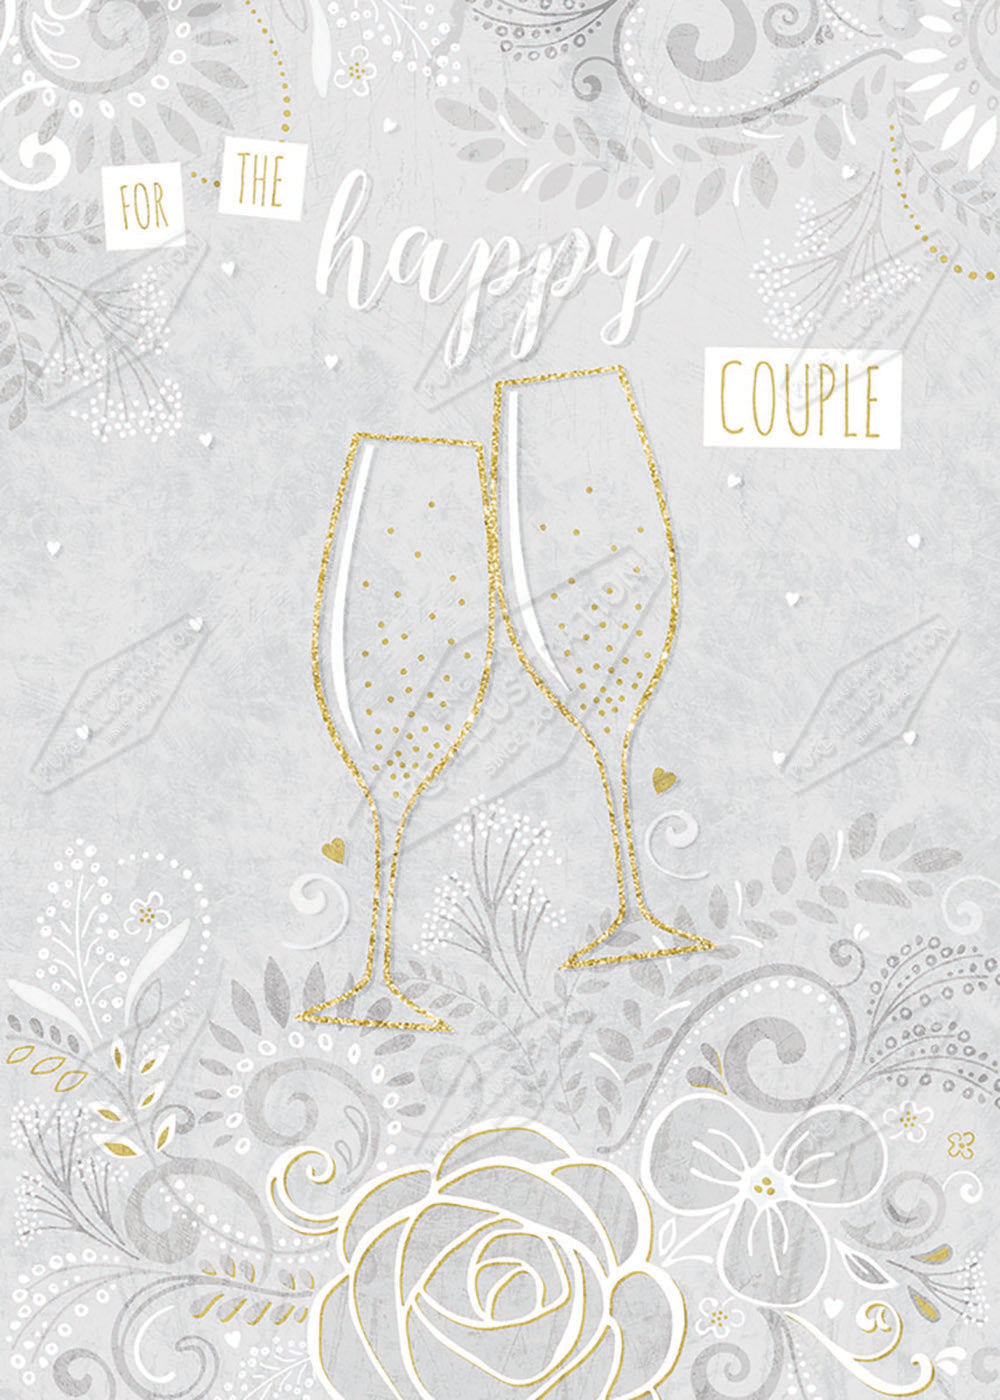 Wedding / Anniversary Design by Gill Eggleston for Pure Art Licensing Agency & Surface Design Studio